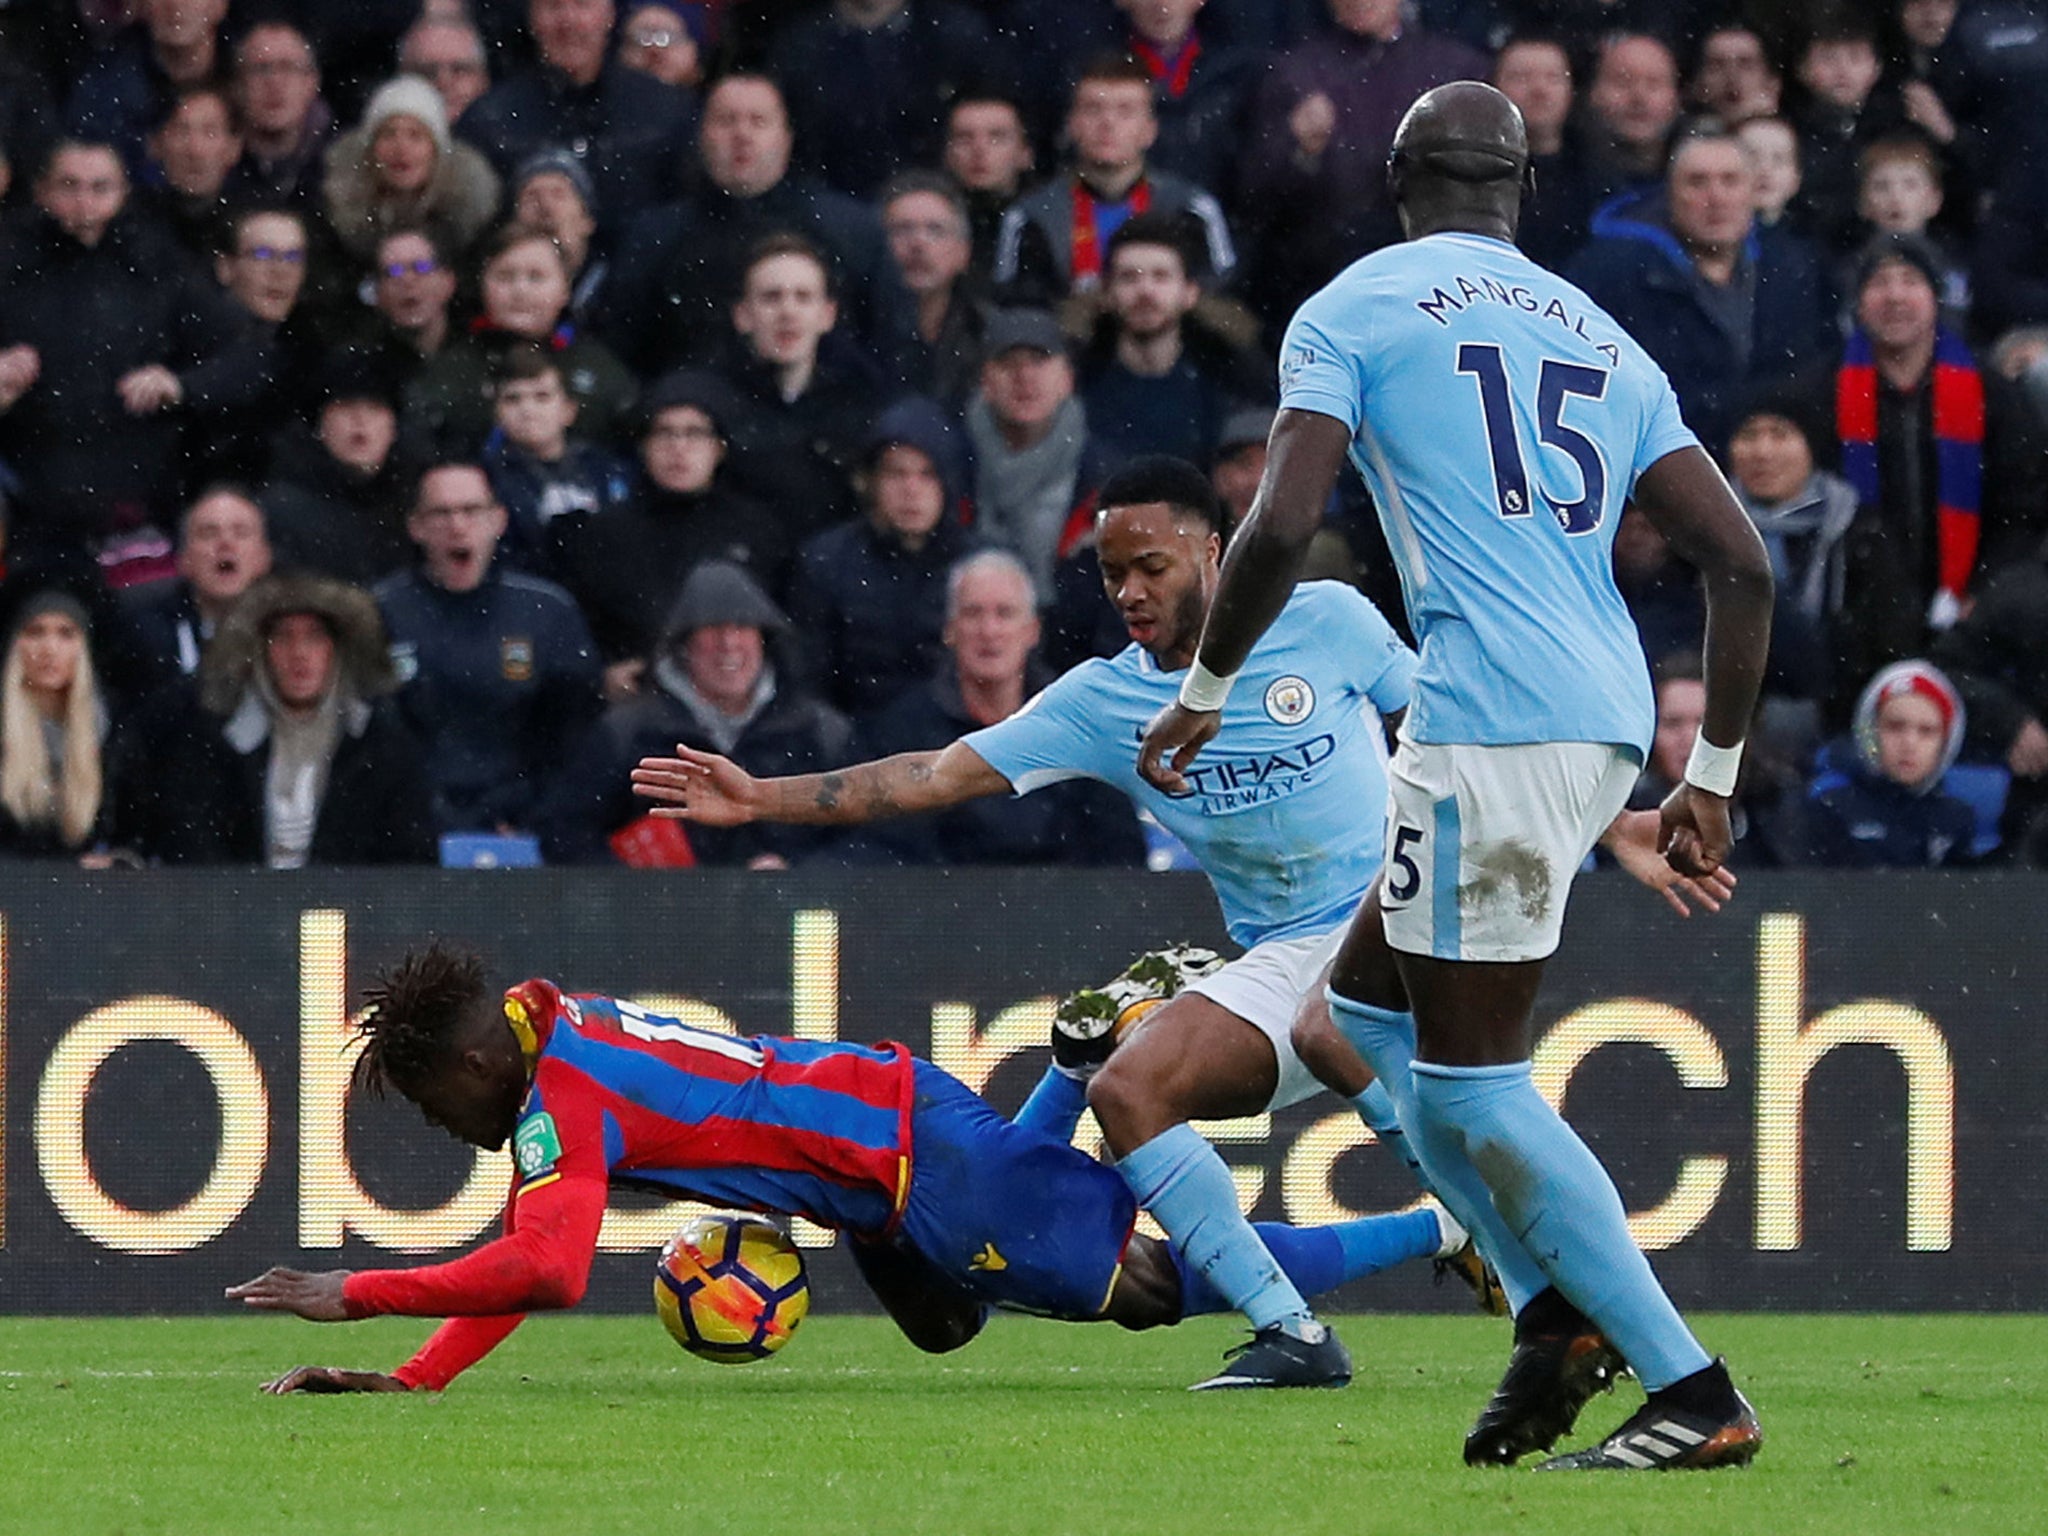 Wilfriez Zaha won a penalty when he was brought down by Raheem Sterling